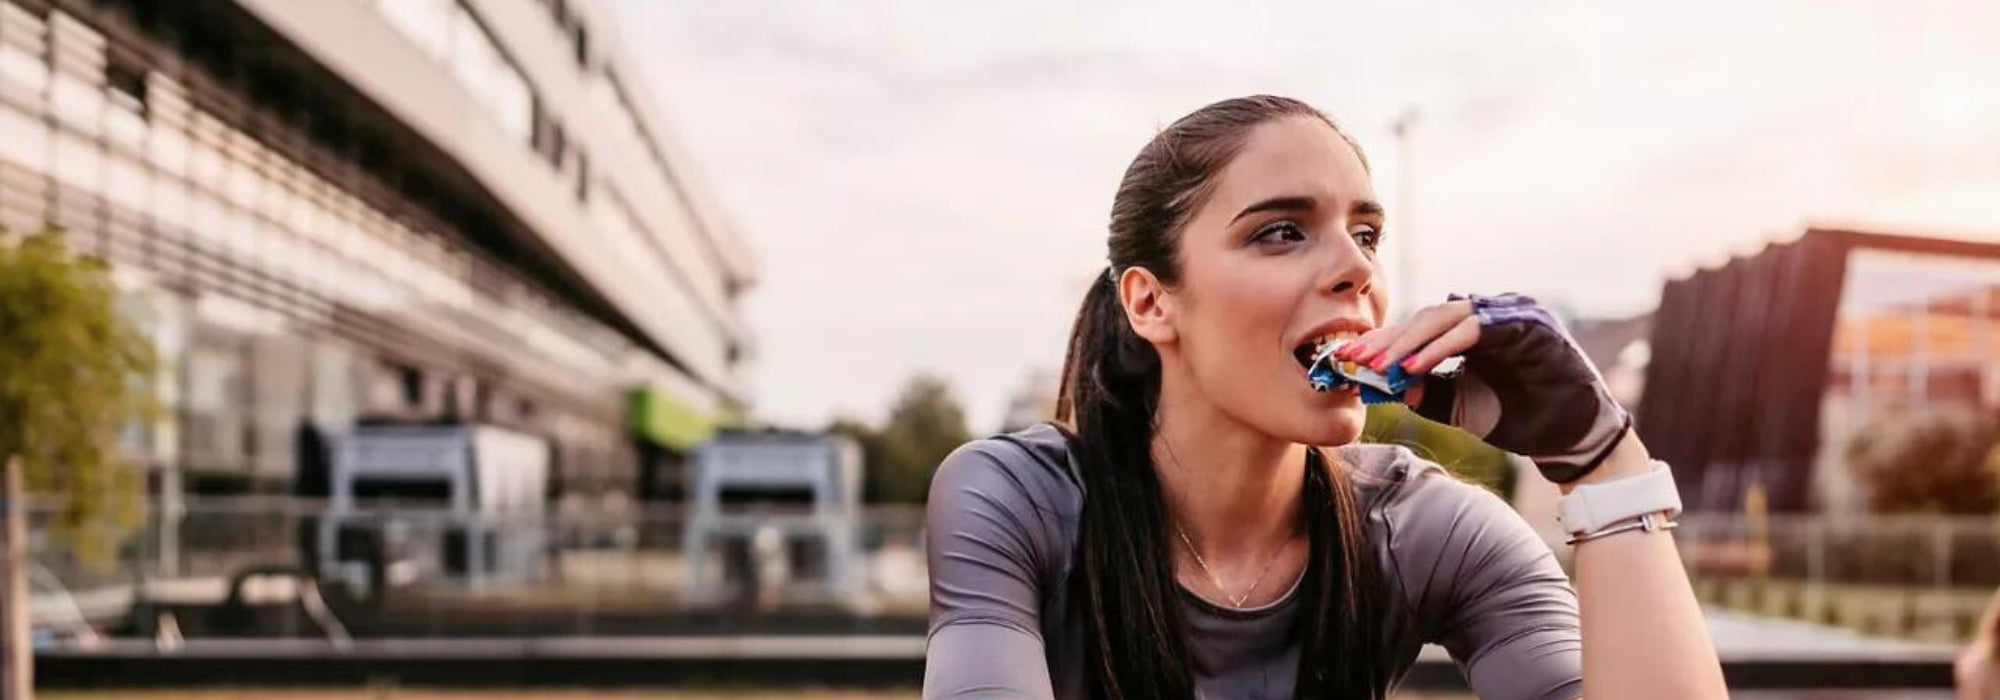 young women workout outside eating energy bar fitness